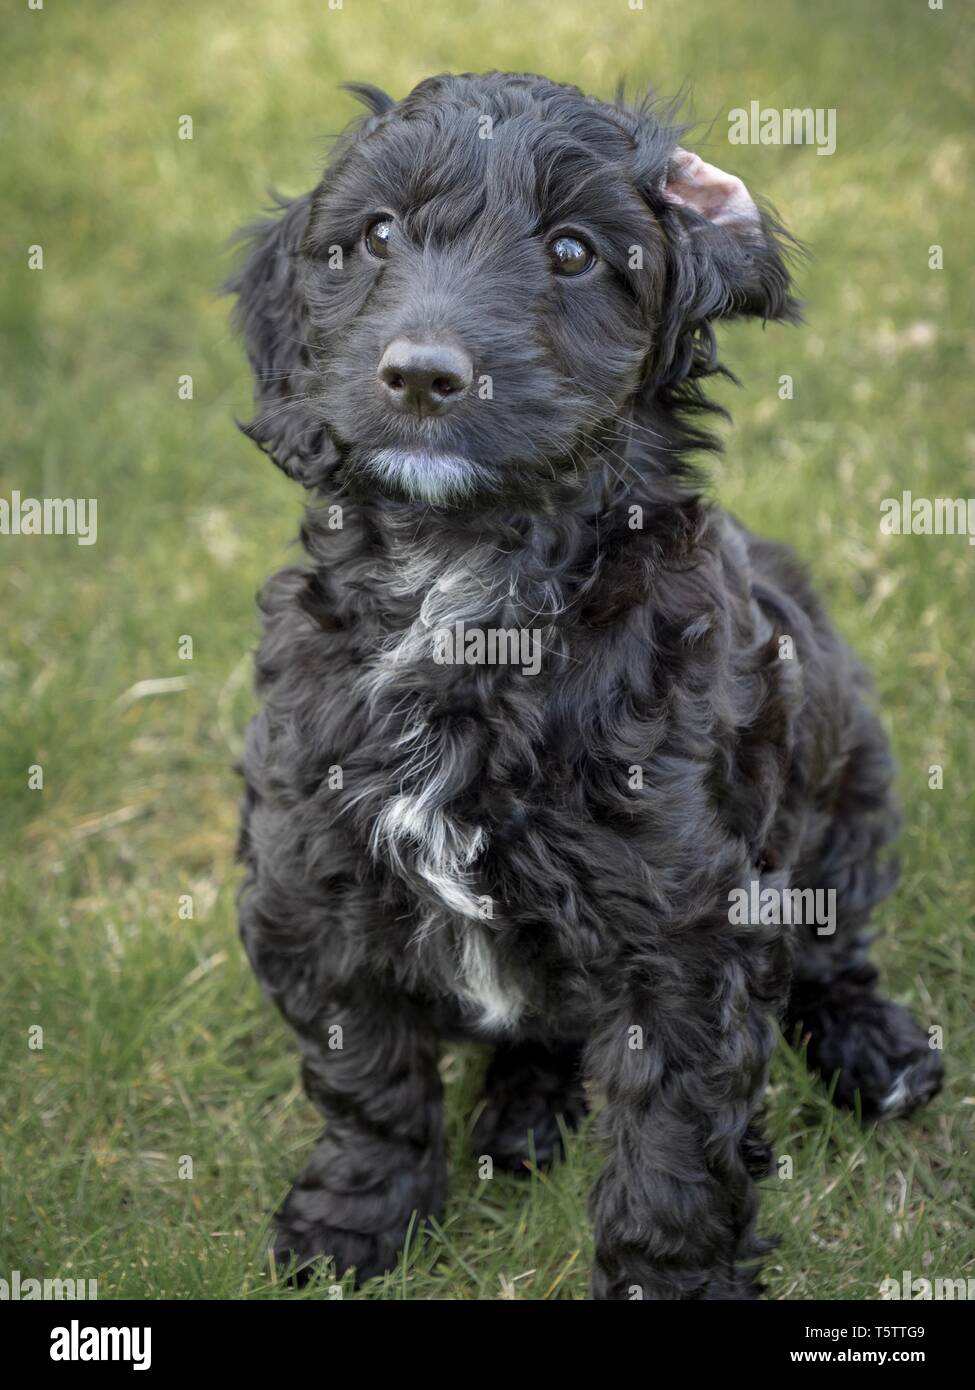 A small, cute, black cockapoo puppy sitting in a garden with one ear folded back Stock Photo